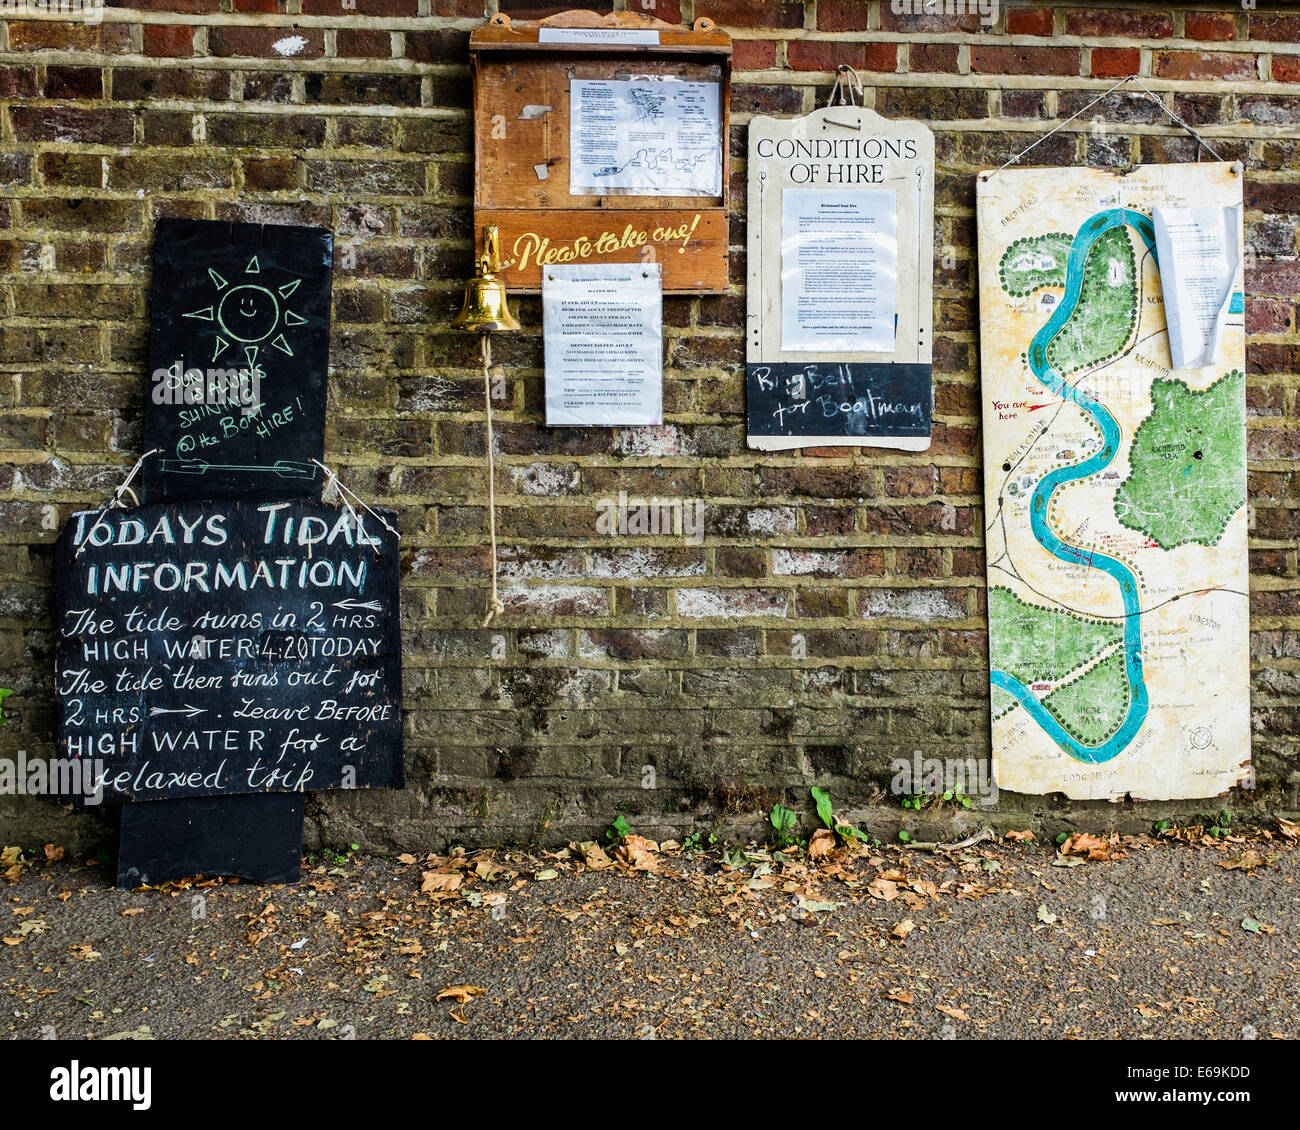 Thames Riverside Notice boards about boat hire, map and Tide information sign - Richmond upon Thames, Surrey, London, UK Stock Photo